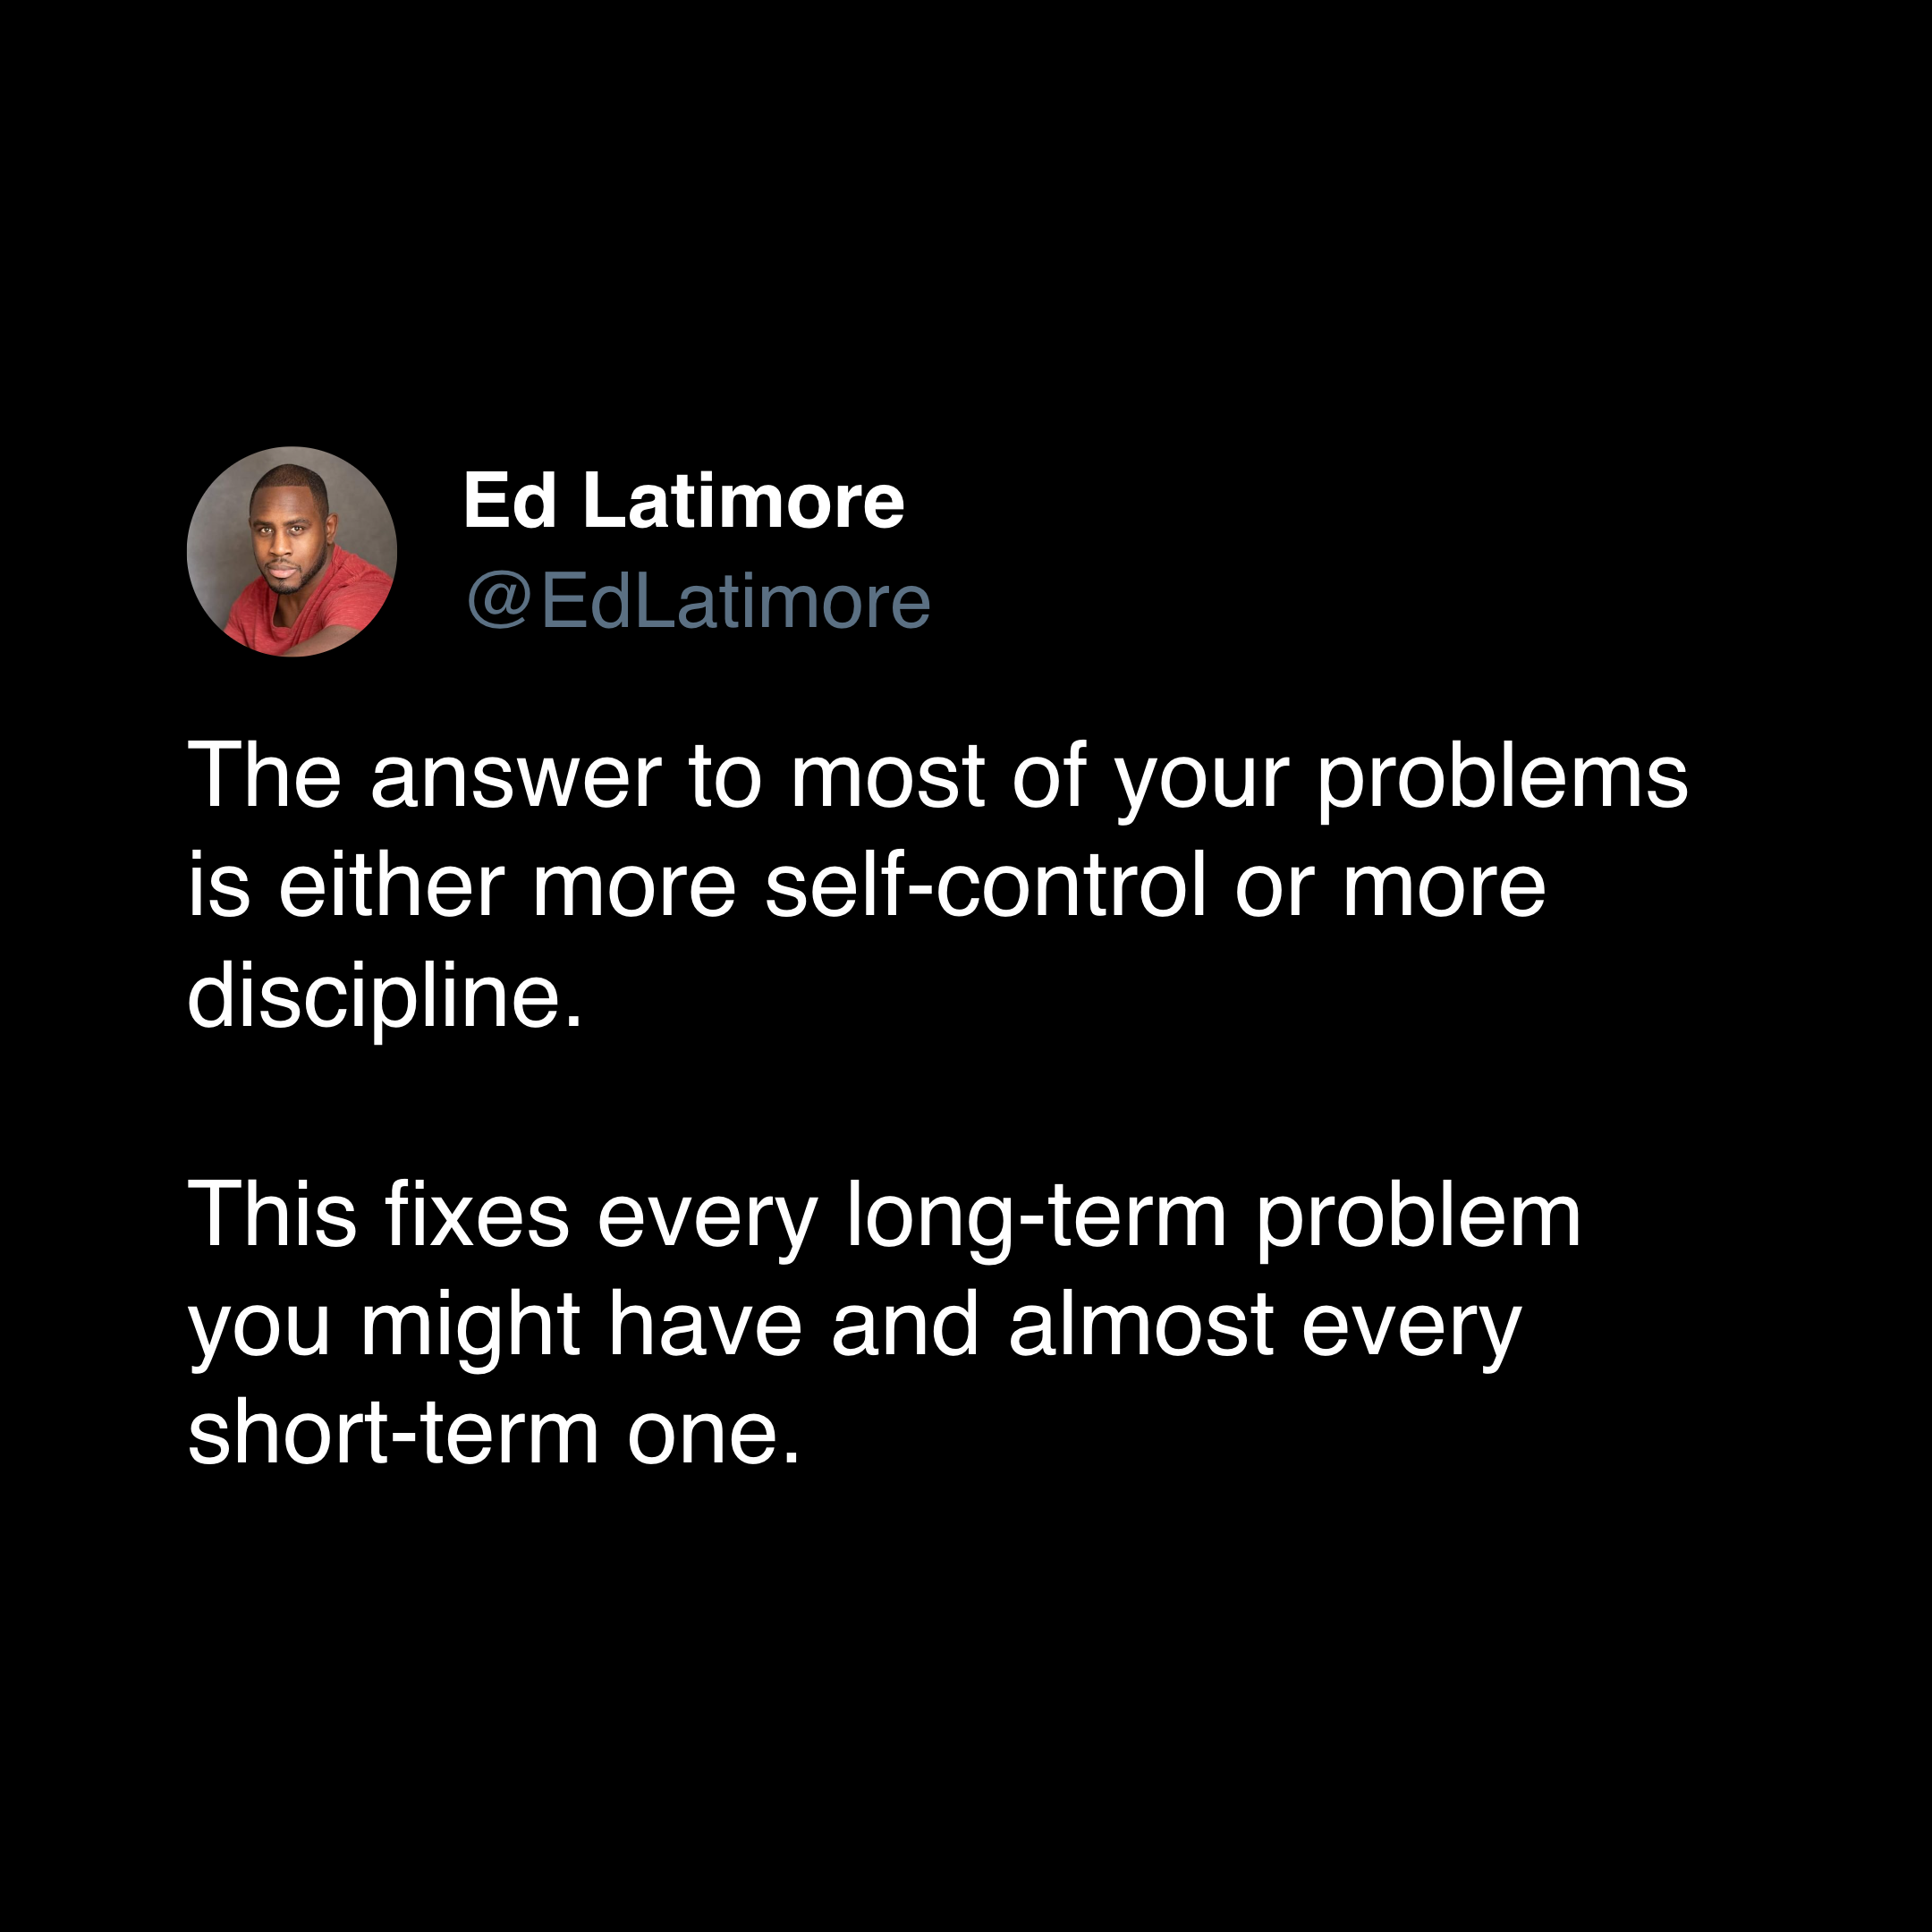 ed latimore discipline quote "discipline is the answer to most of your problems"